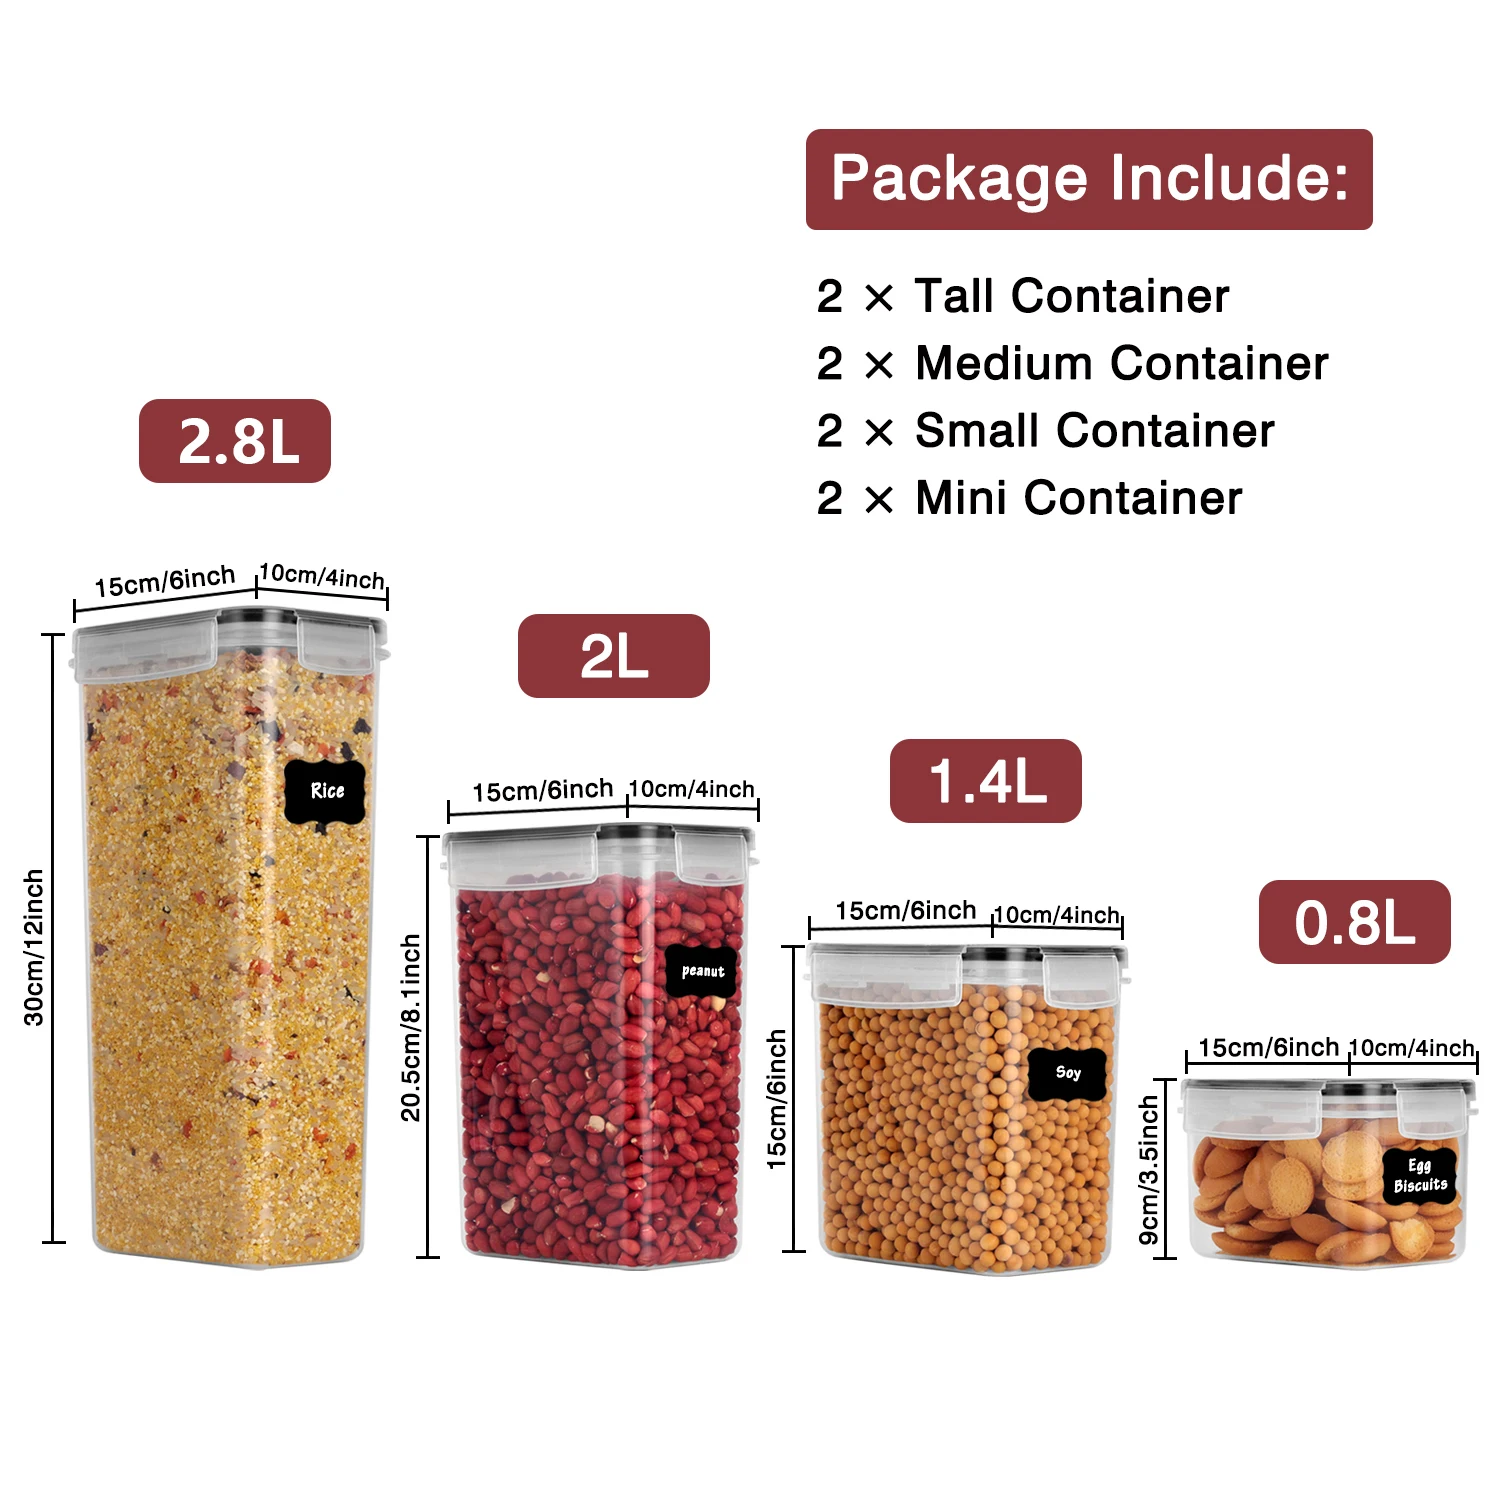 https://ae01.alicdn.com/kf/H9ec533dff9704410b94adfe17b59cca1M/GoMaihe-8-10-Pieces-Food-Container-Kitchen-Storage-Cereal-Dispenser-for-Storing-Pasta-and-Tea-Coffee.jpg